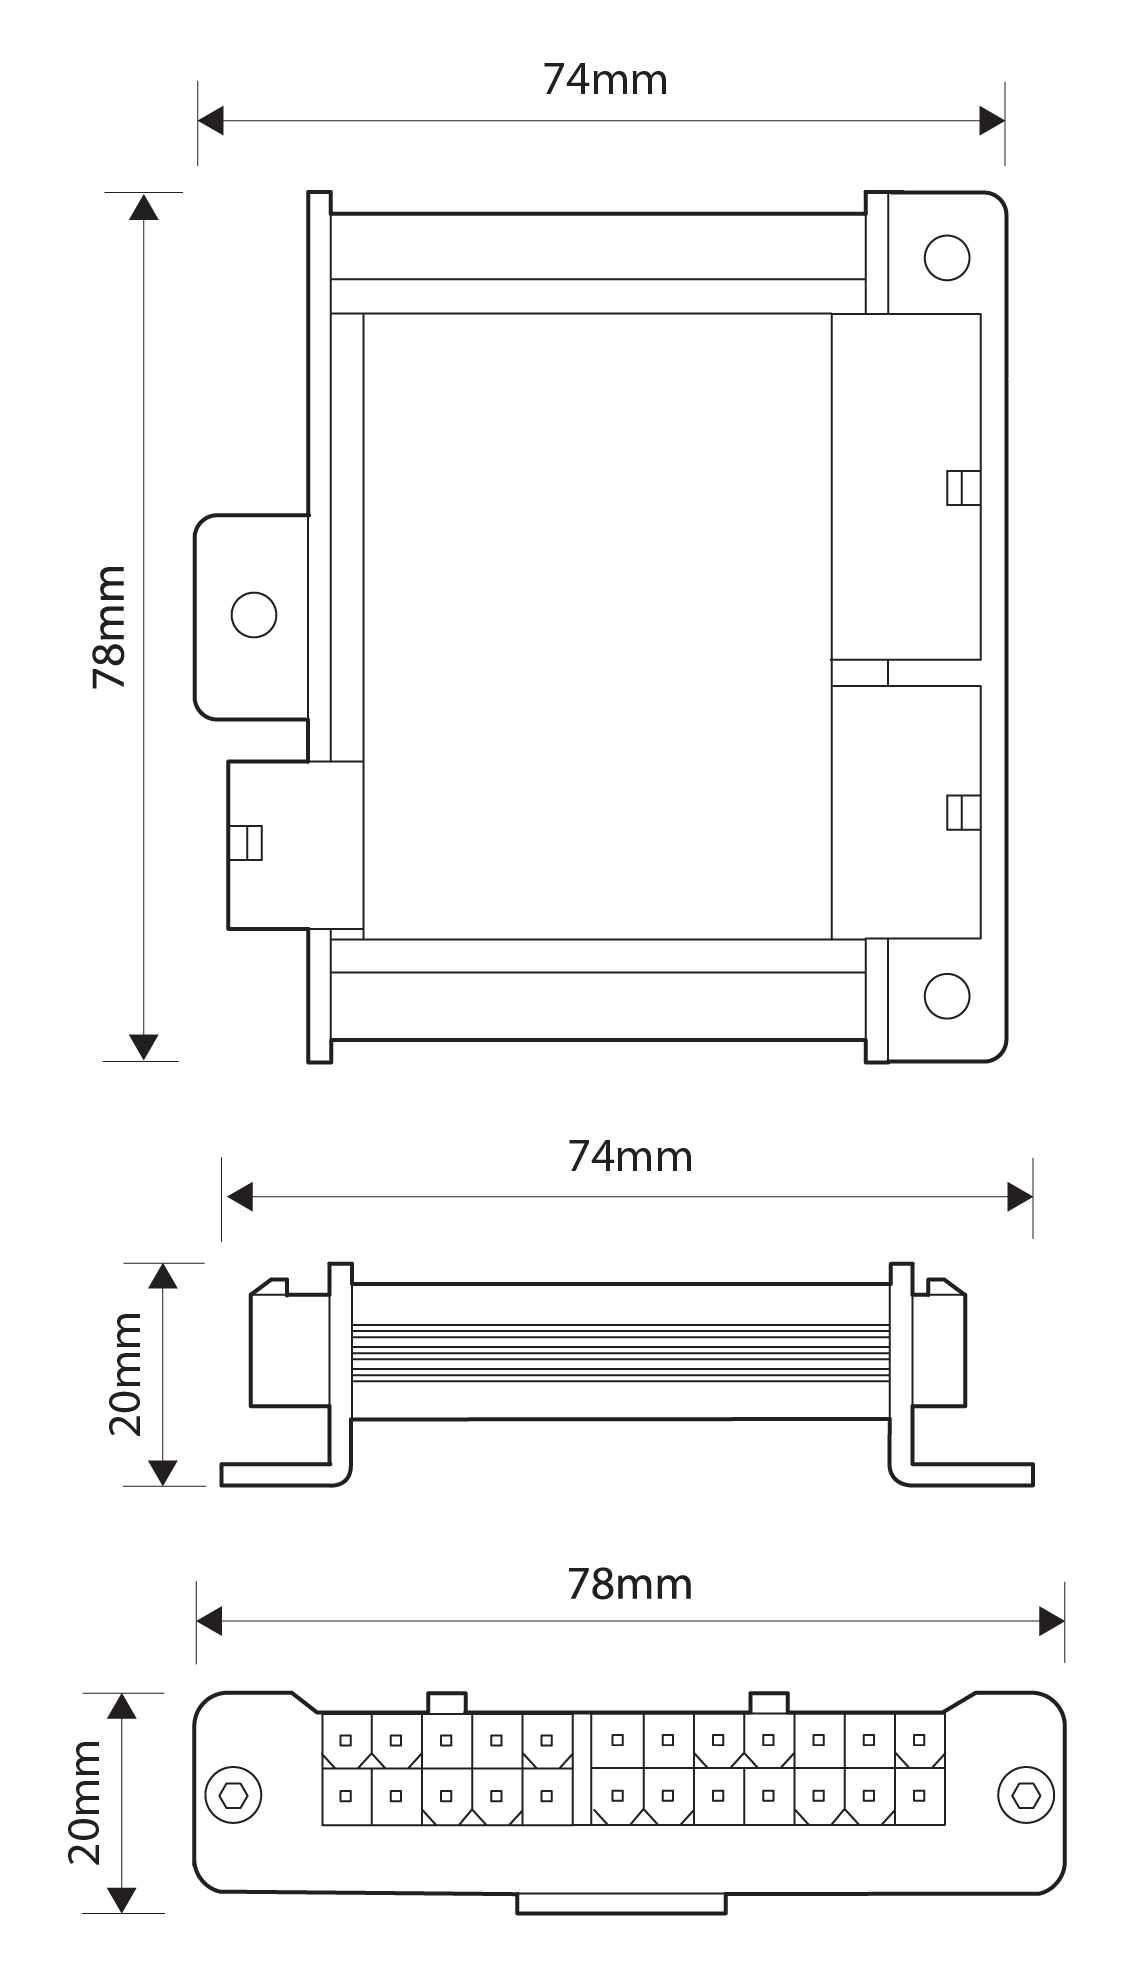 UNI-CIM-001 MCS-CIM CAN Interface Module Dimensions Illustration Showing 74mm Width, 78mm height and 20mm Depth